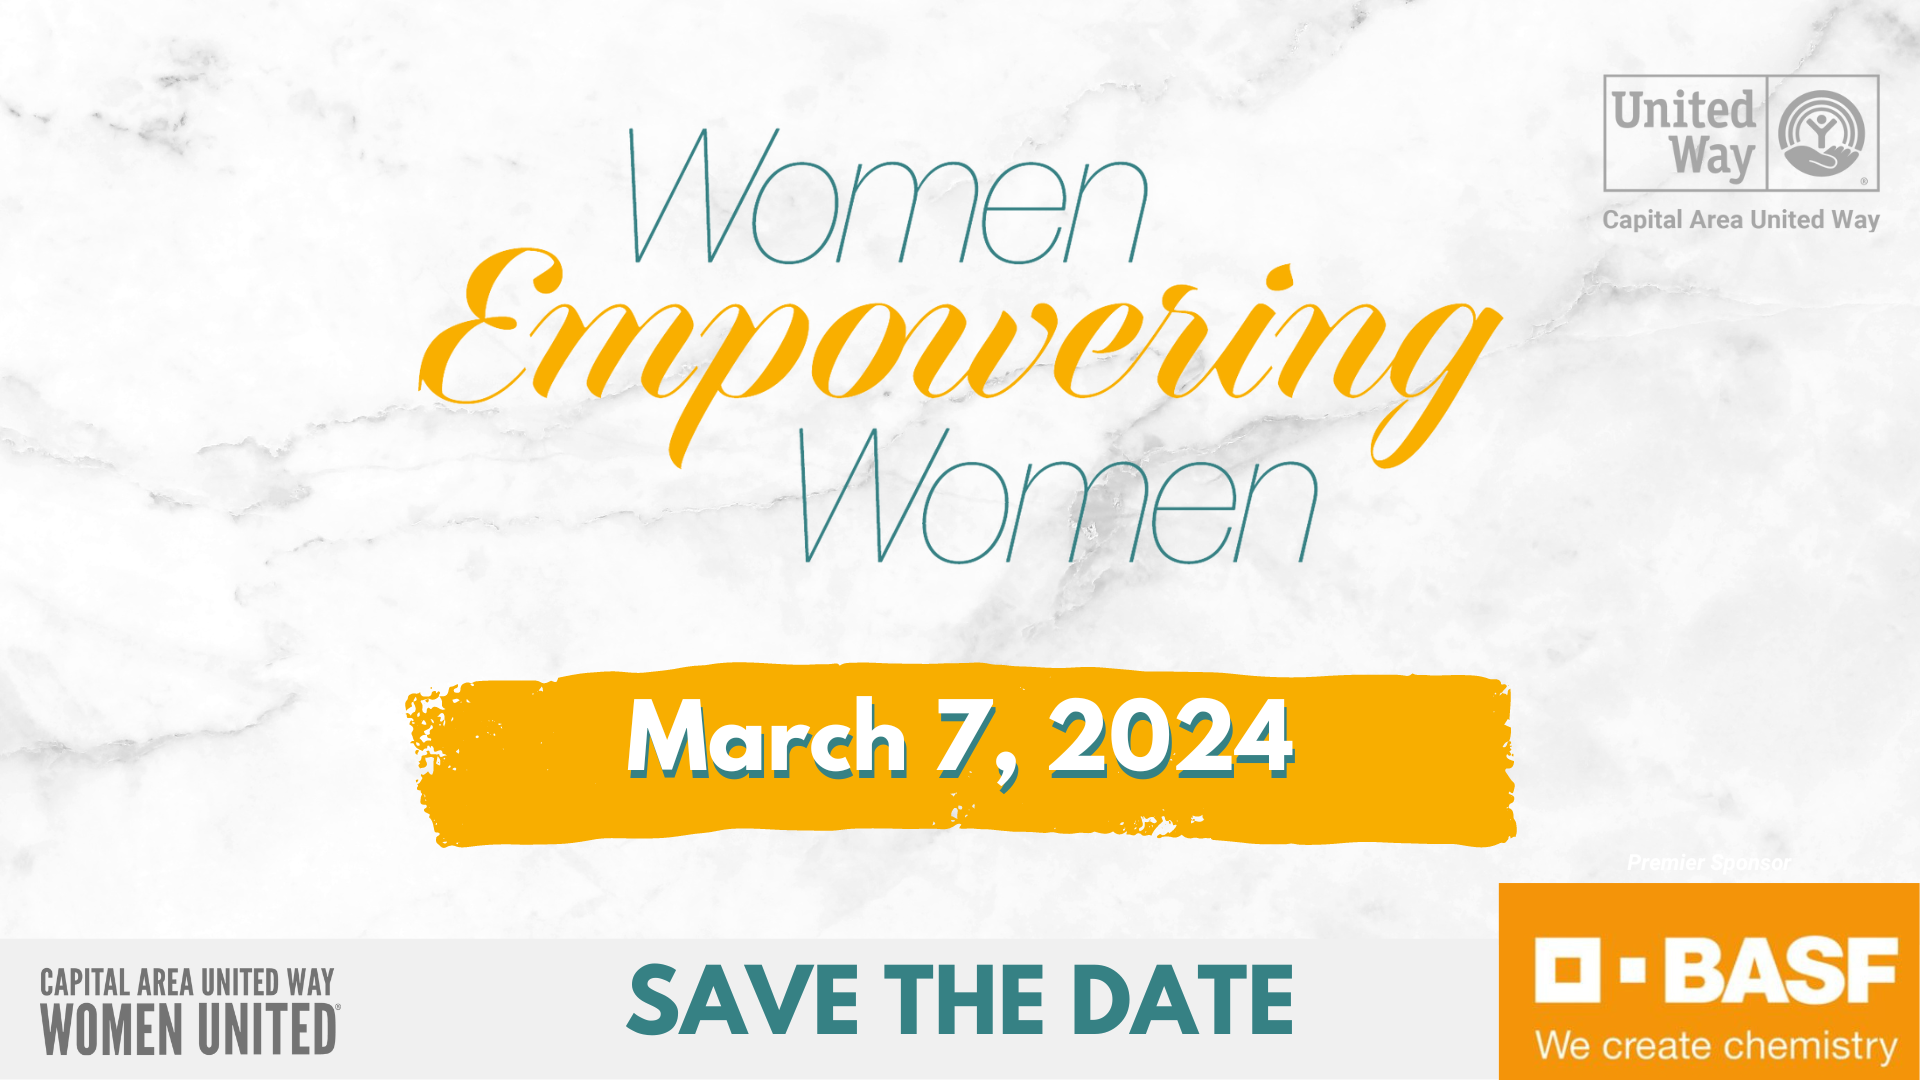 save the date for women empowering women